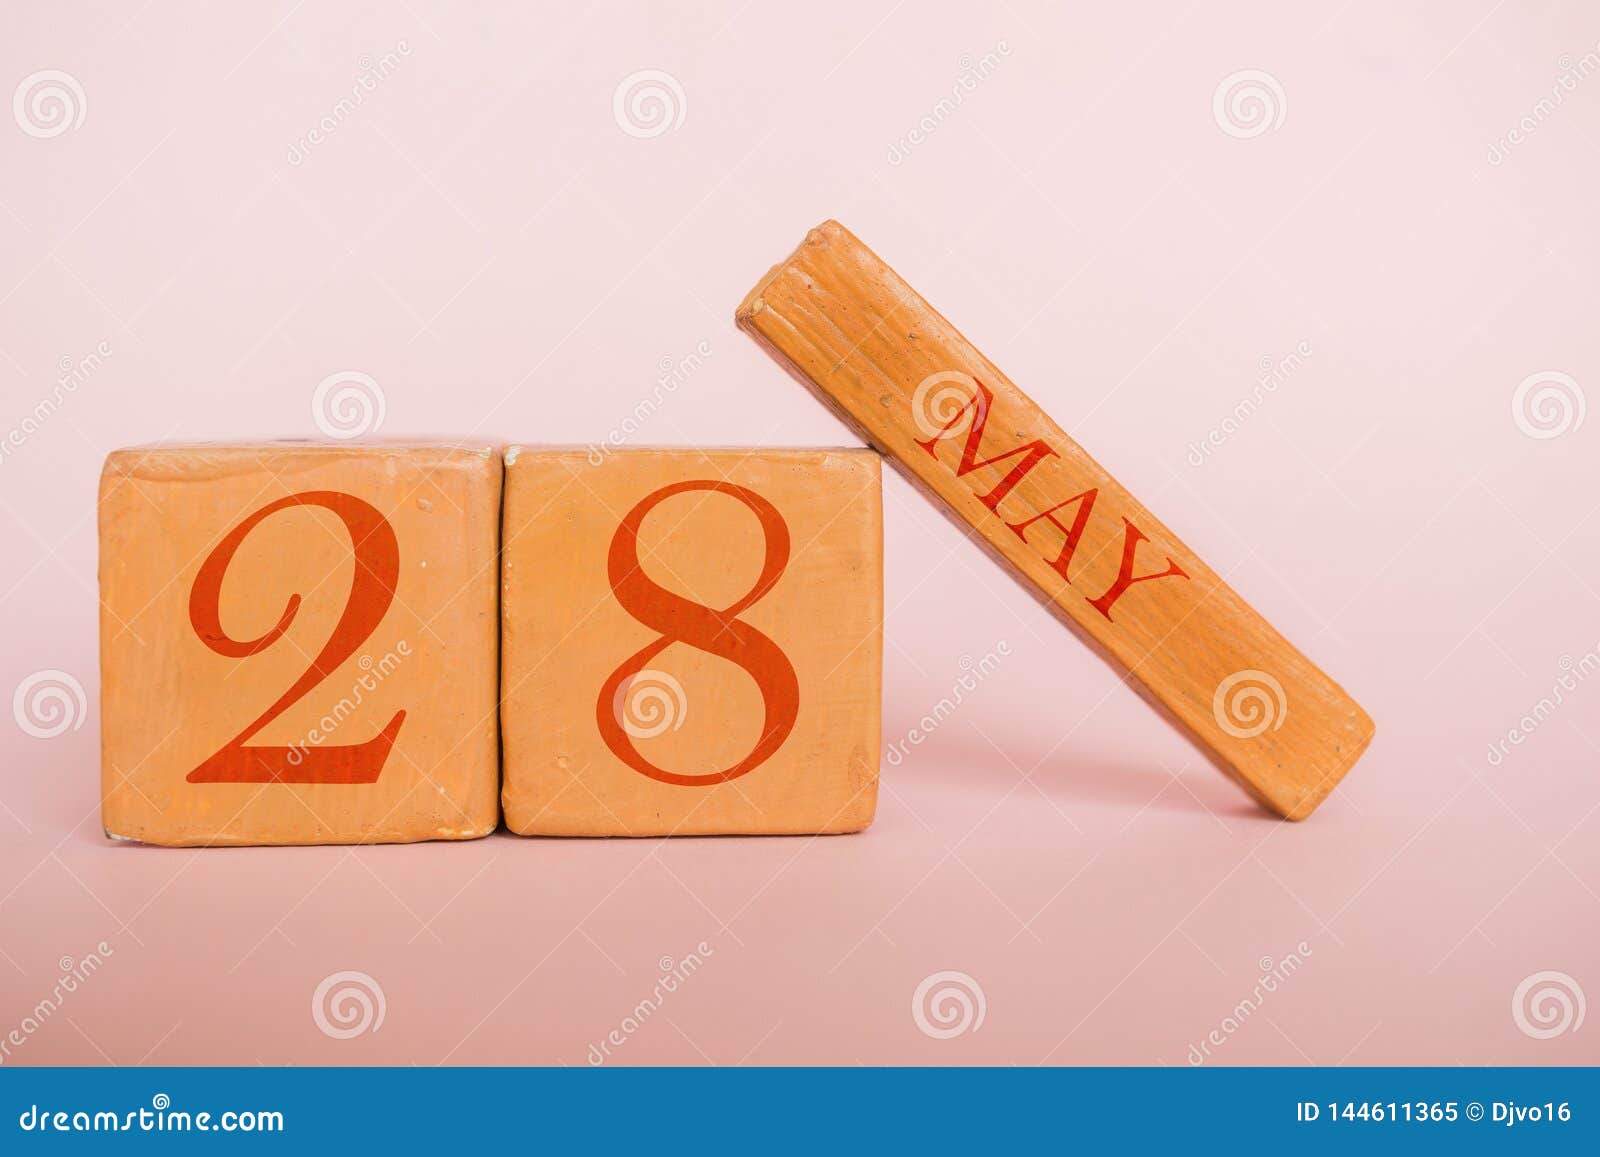 May 28th. Day 28 of Month, Handmade Wood Calendar on Modern Color Background. Spring Month, Day of the Year Concept Stock Image - Image of plan, desk: 144611365